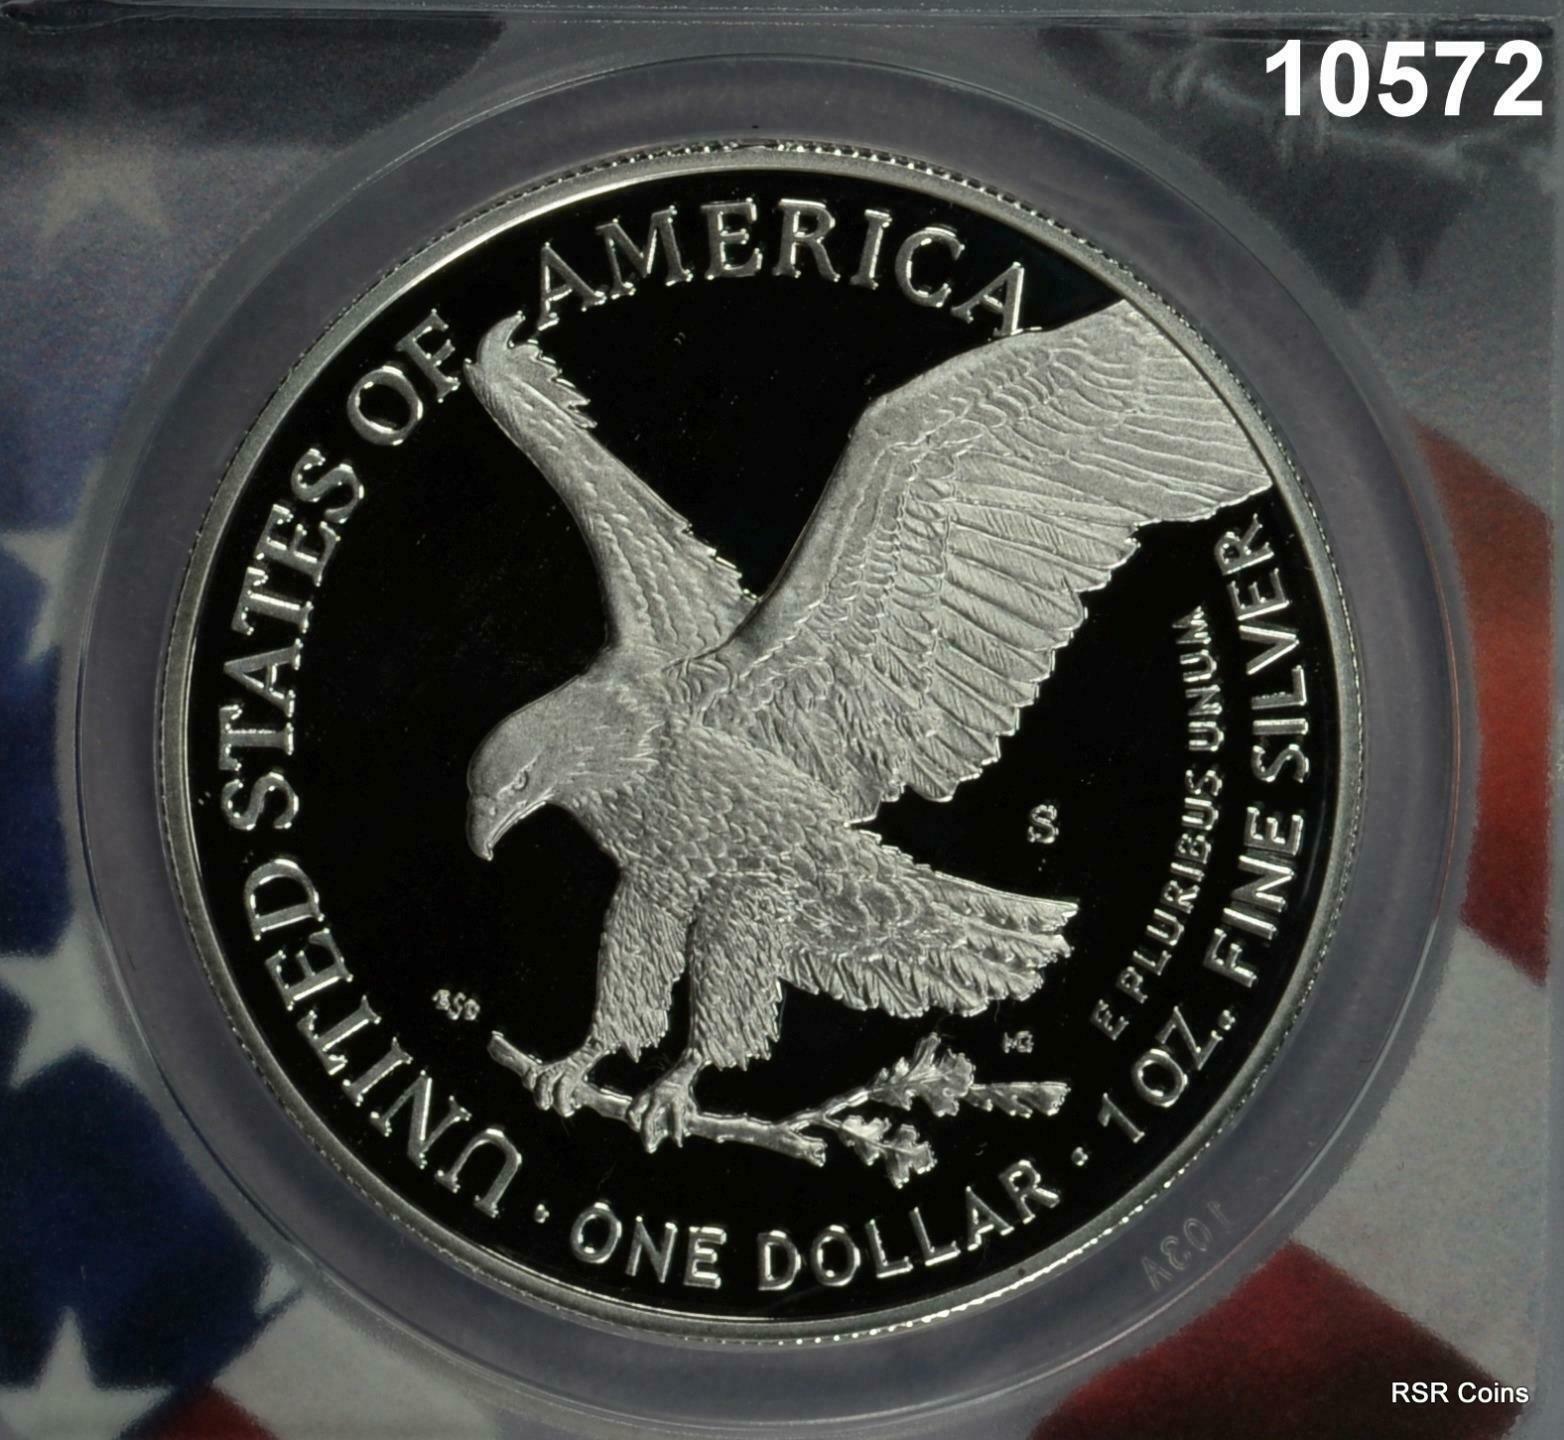 2021 S $1 SILVER EAGLE TYPE 2 ANACS CERTIFIED PR70 DCAM FIRST STRIKE #10572